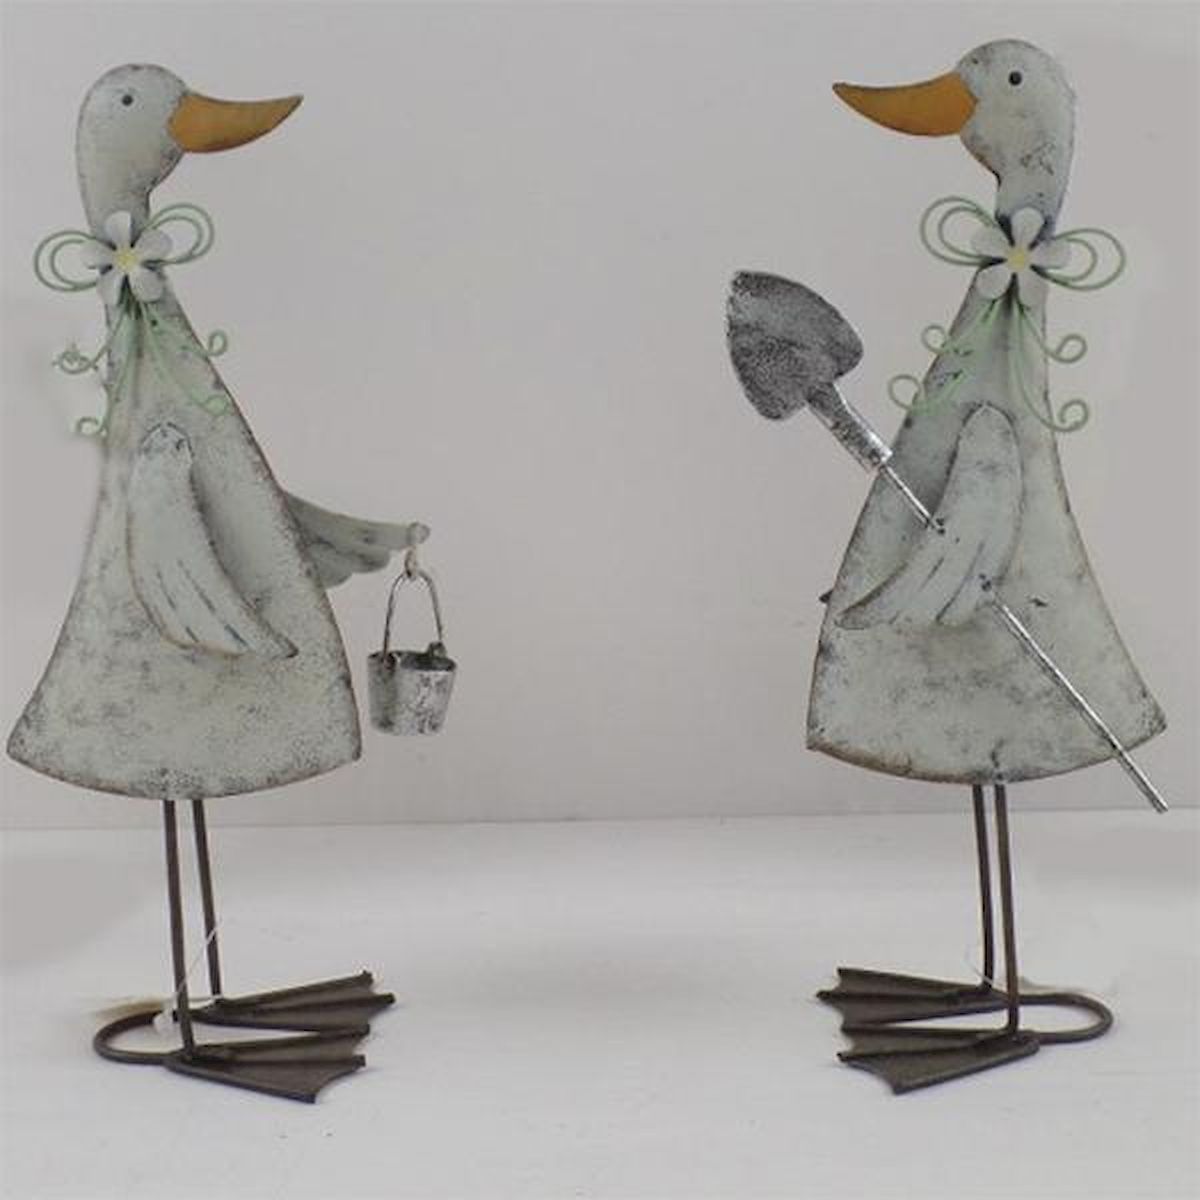 Picture of Forpost FP-HUS-359 Metal Ducks Ready for Gardening Figurine - Set of 2